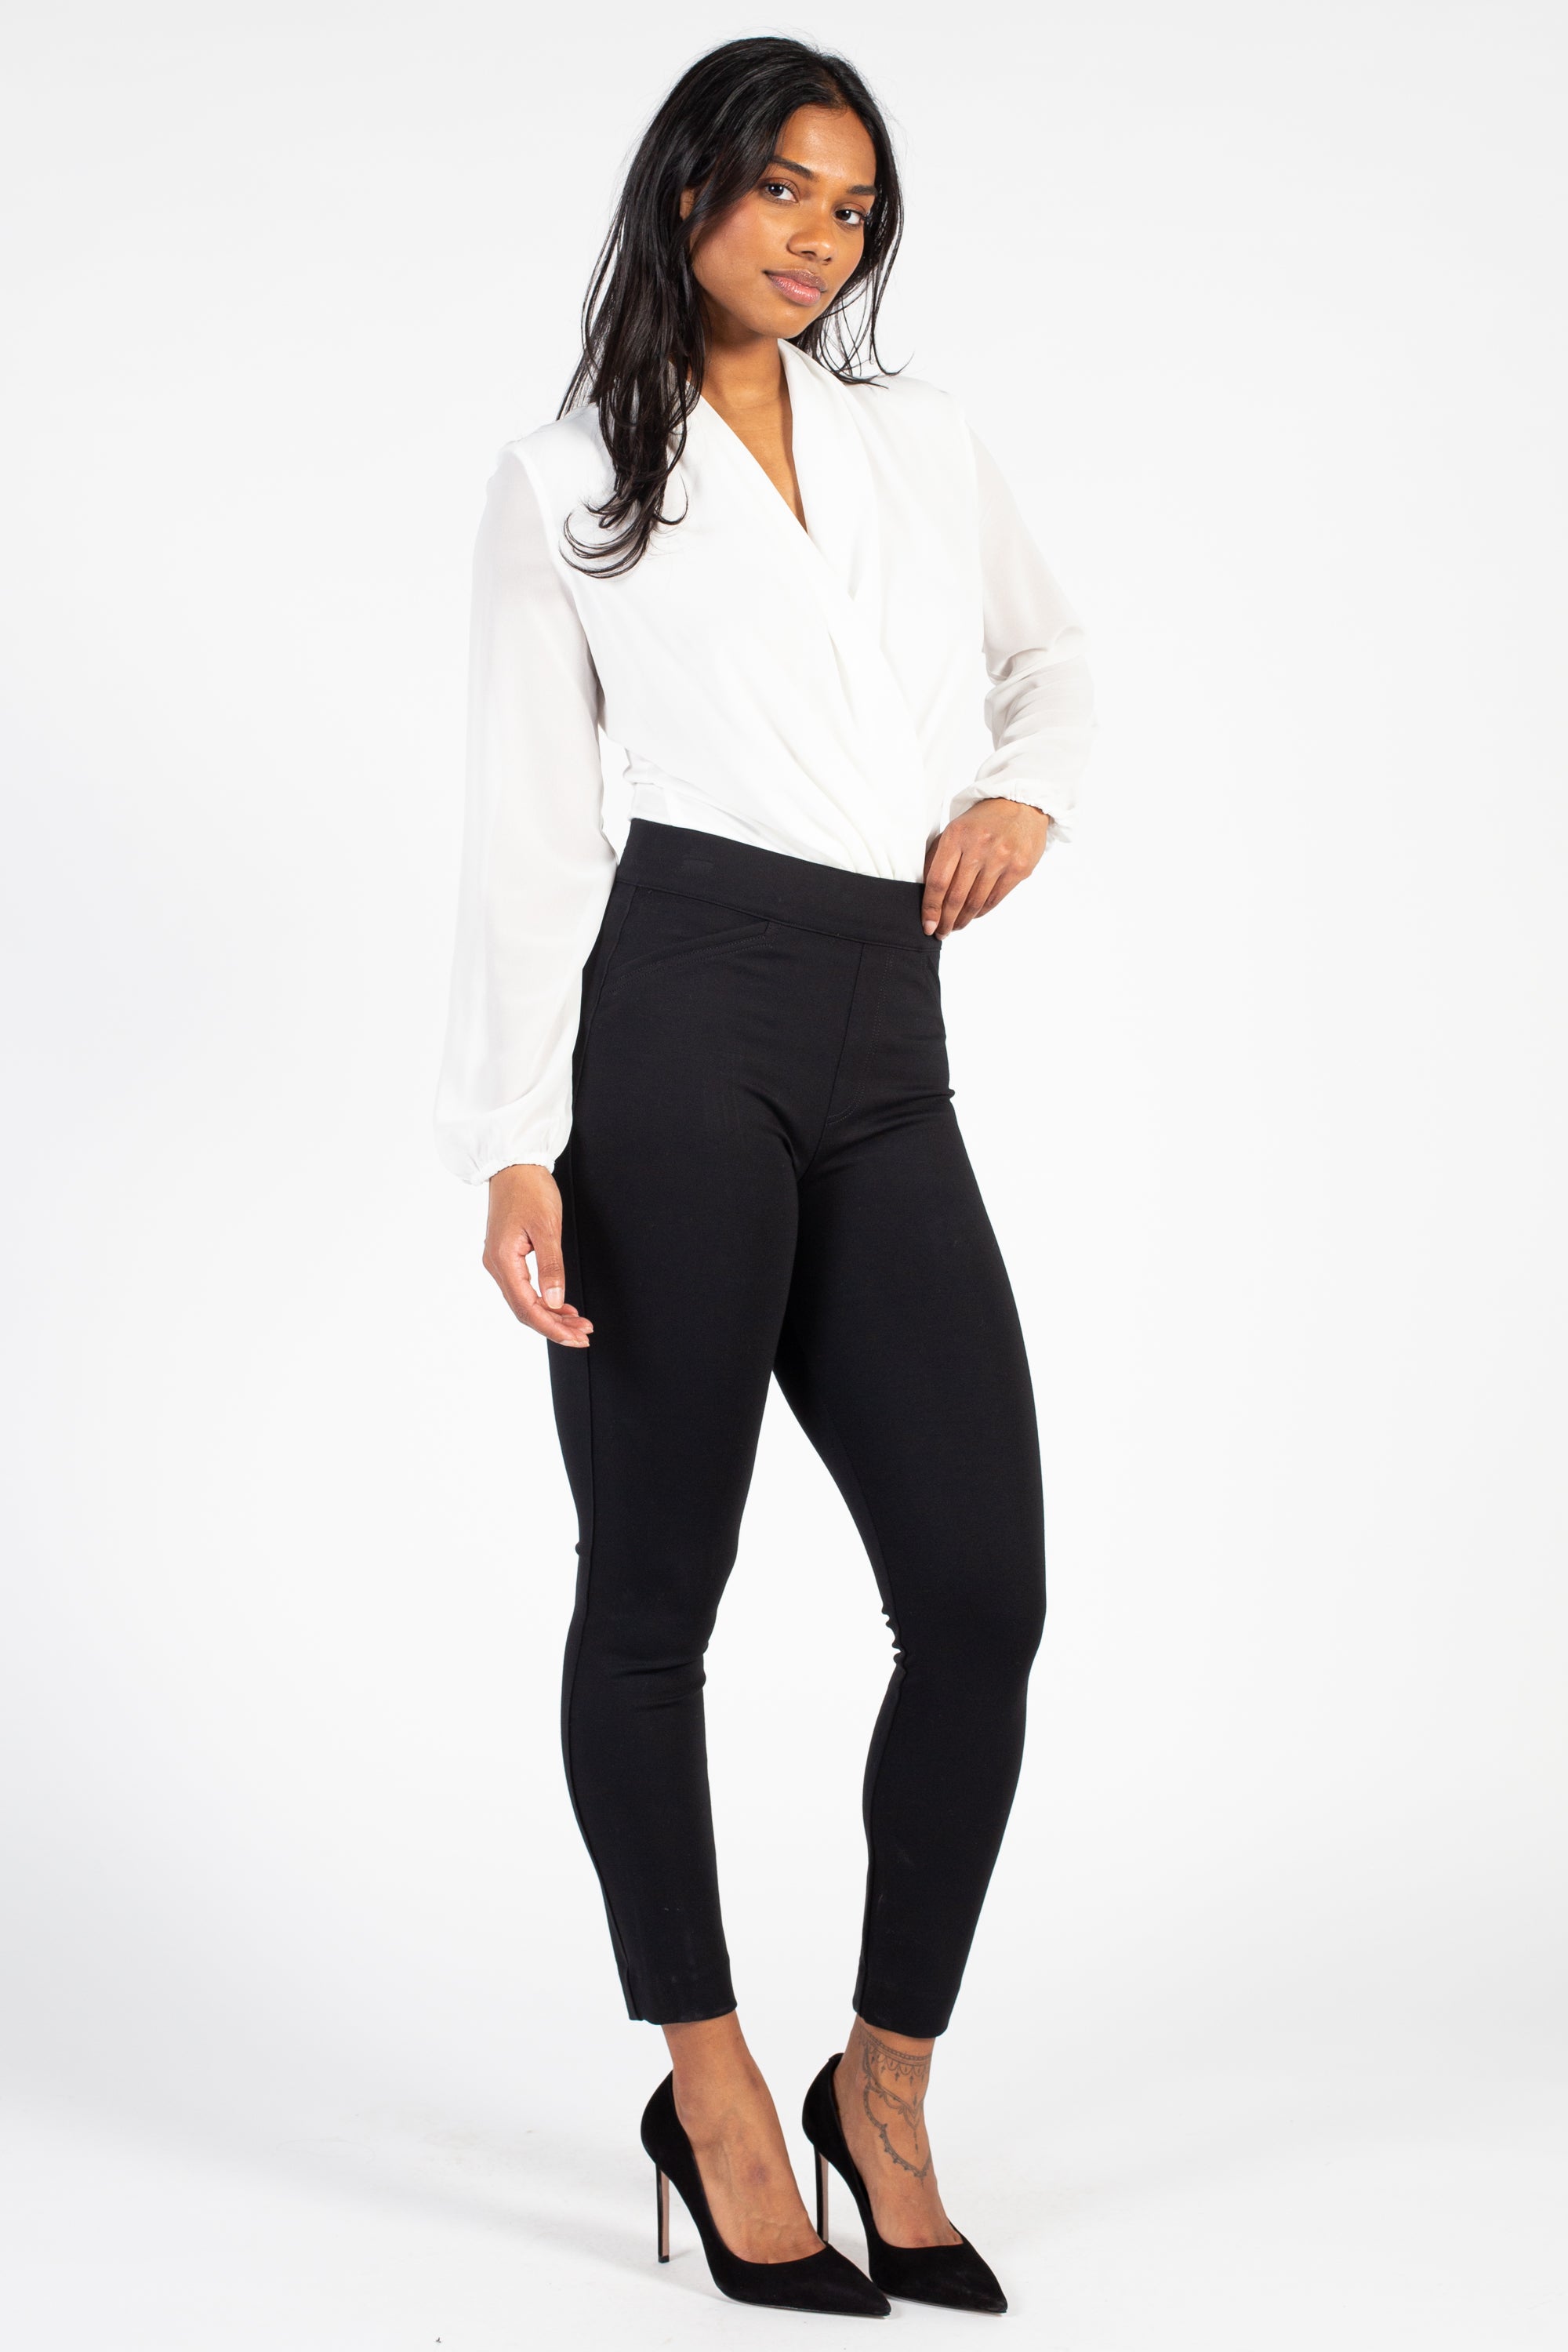 What Girls Want - Shop today Spanx Active Leggings www.whatgirlswant.ca or  visit our store at 157 Main Street Unionville, Ontario, Canada.  #whatgirlswant #fashion #style #ootd #ootn #shapewear #torontofashion  #torontostyle #shopping #love